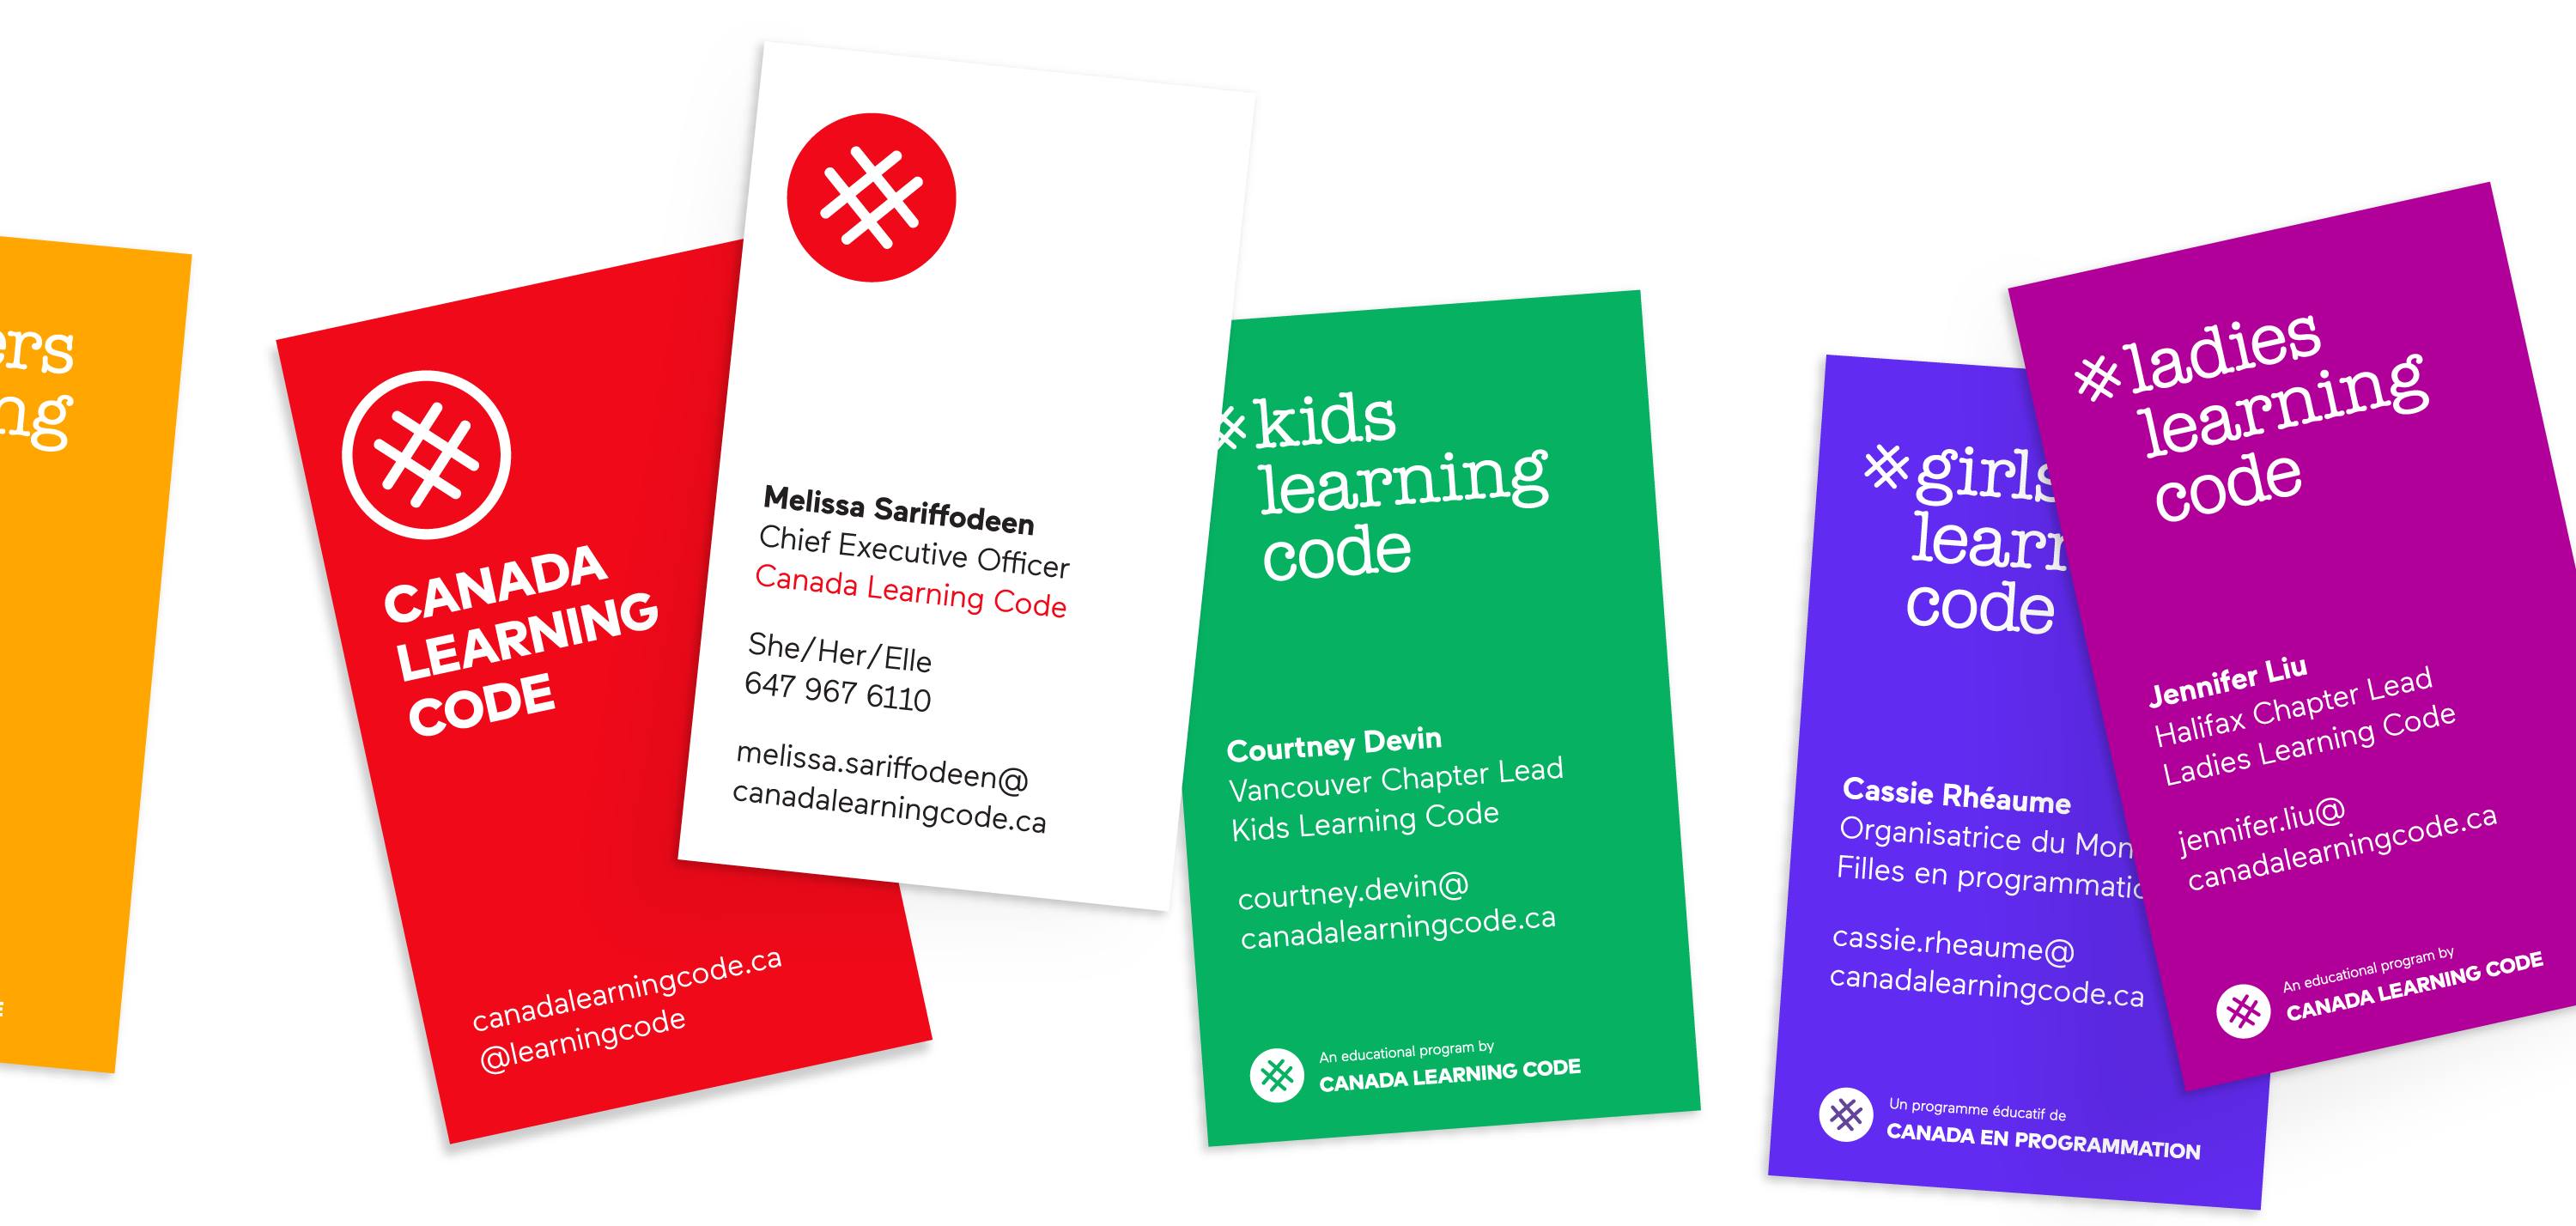 Printed business card designs for the Canada Learning Code leadership team and other program chapter leads